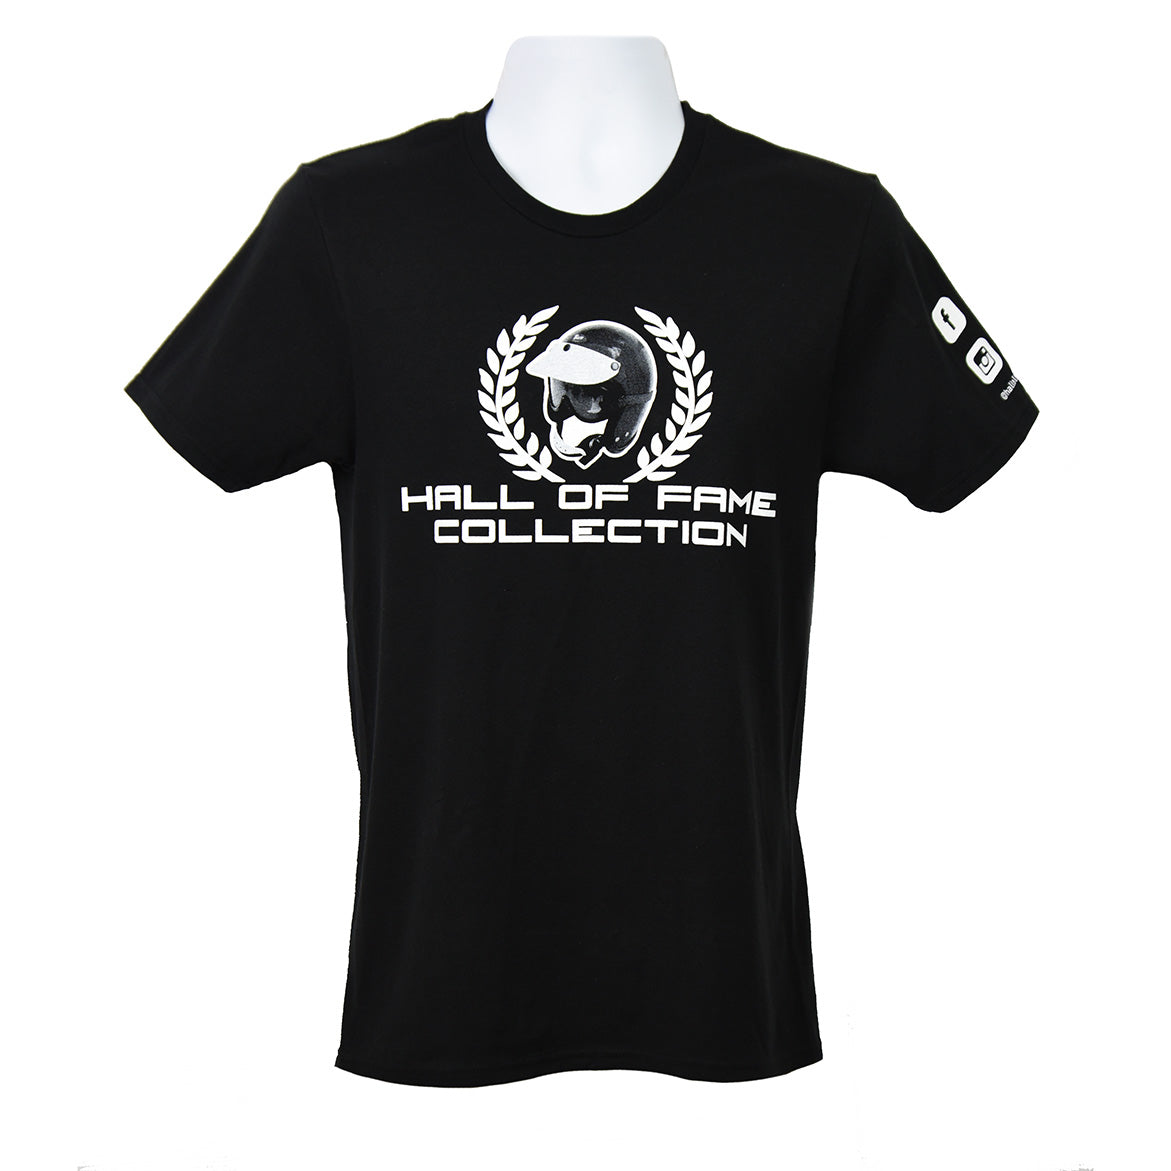 Official Hall Of Fame Collection Limited Edition Black T-Shirt II (Free Shipping)